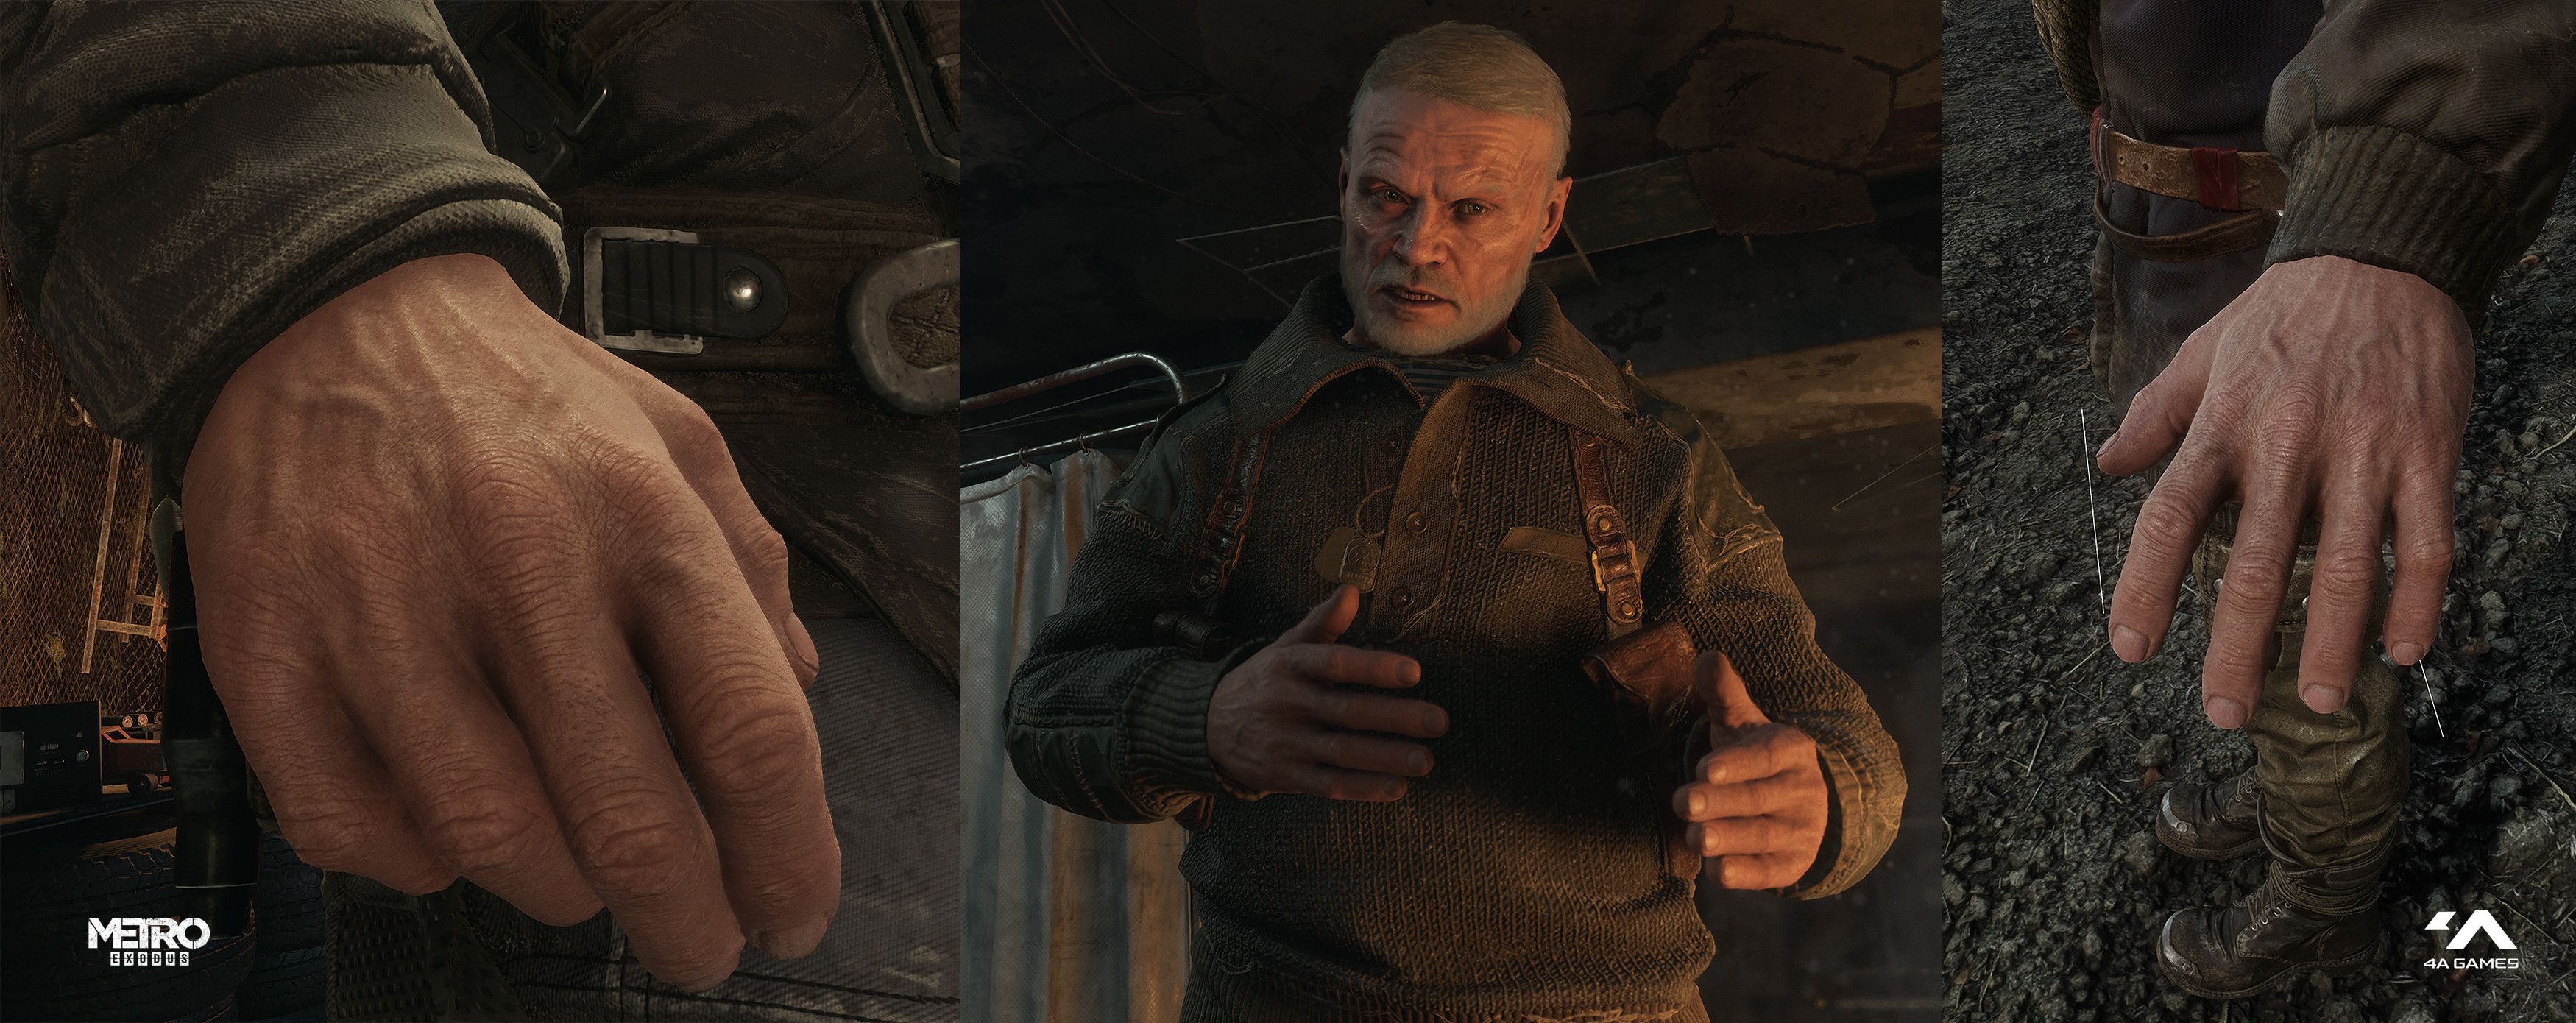 You can see these hands on most male characters in the Metro Exodus game